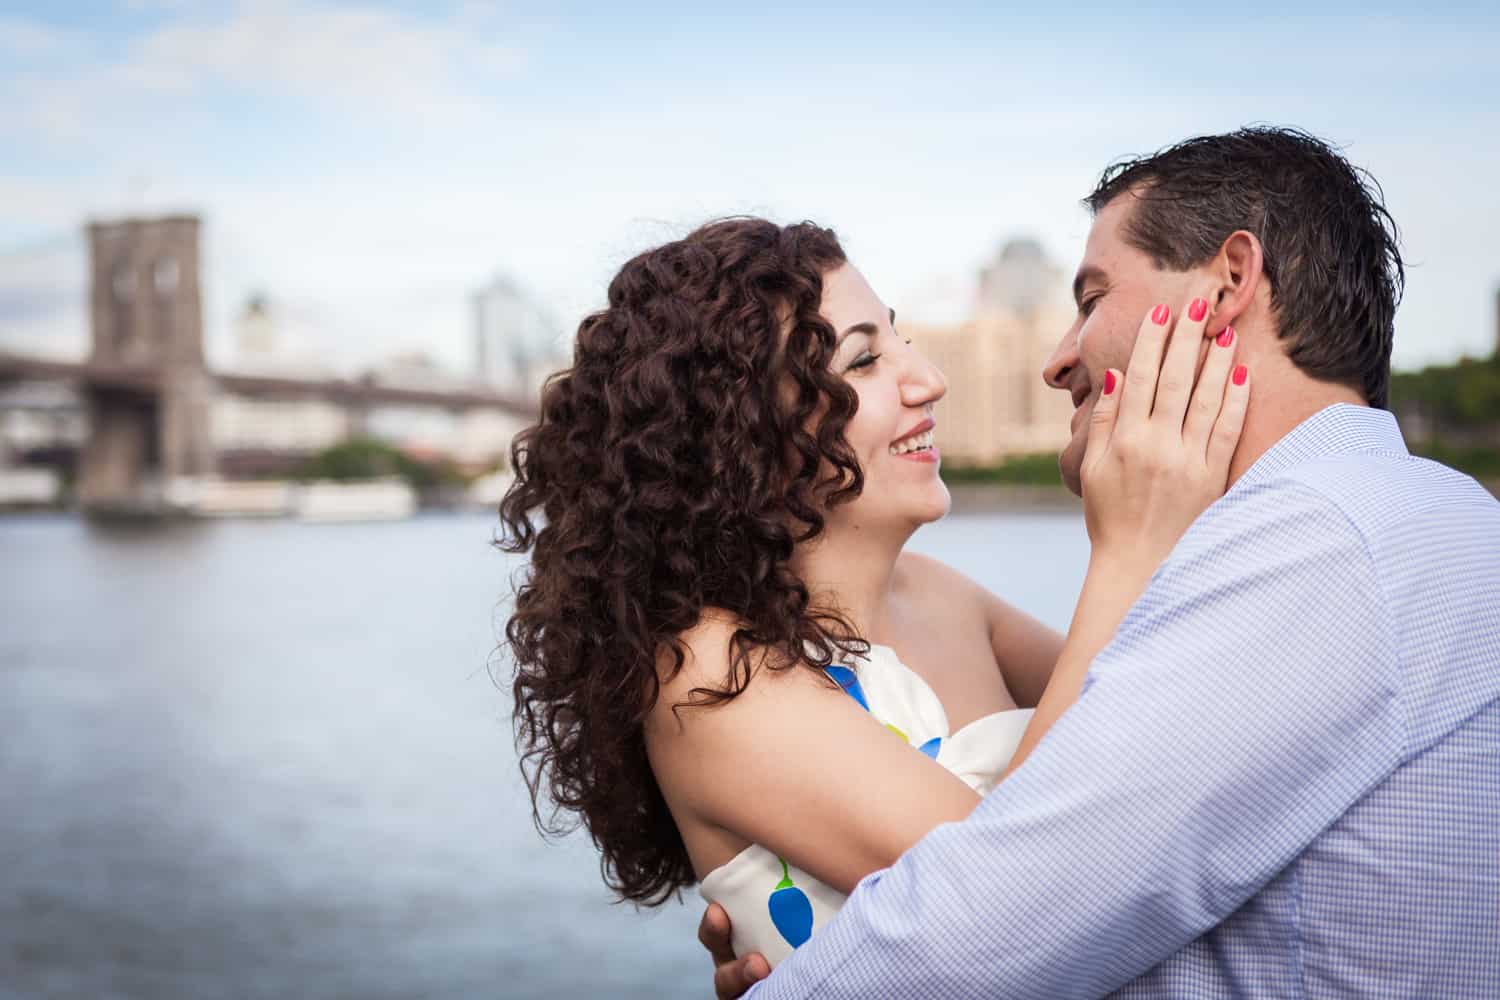 Financial District engagement photos of woman grasping man's face